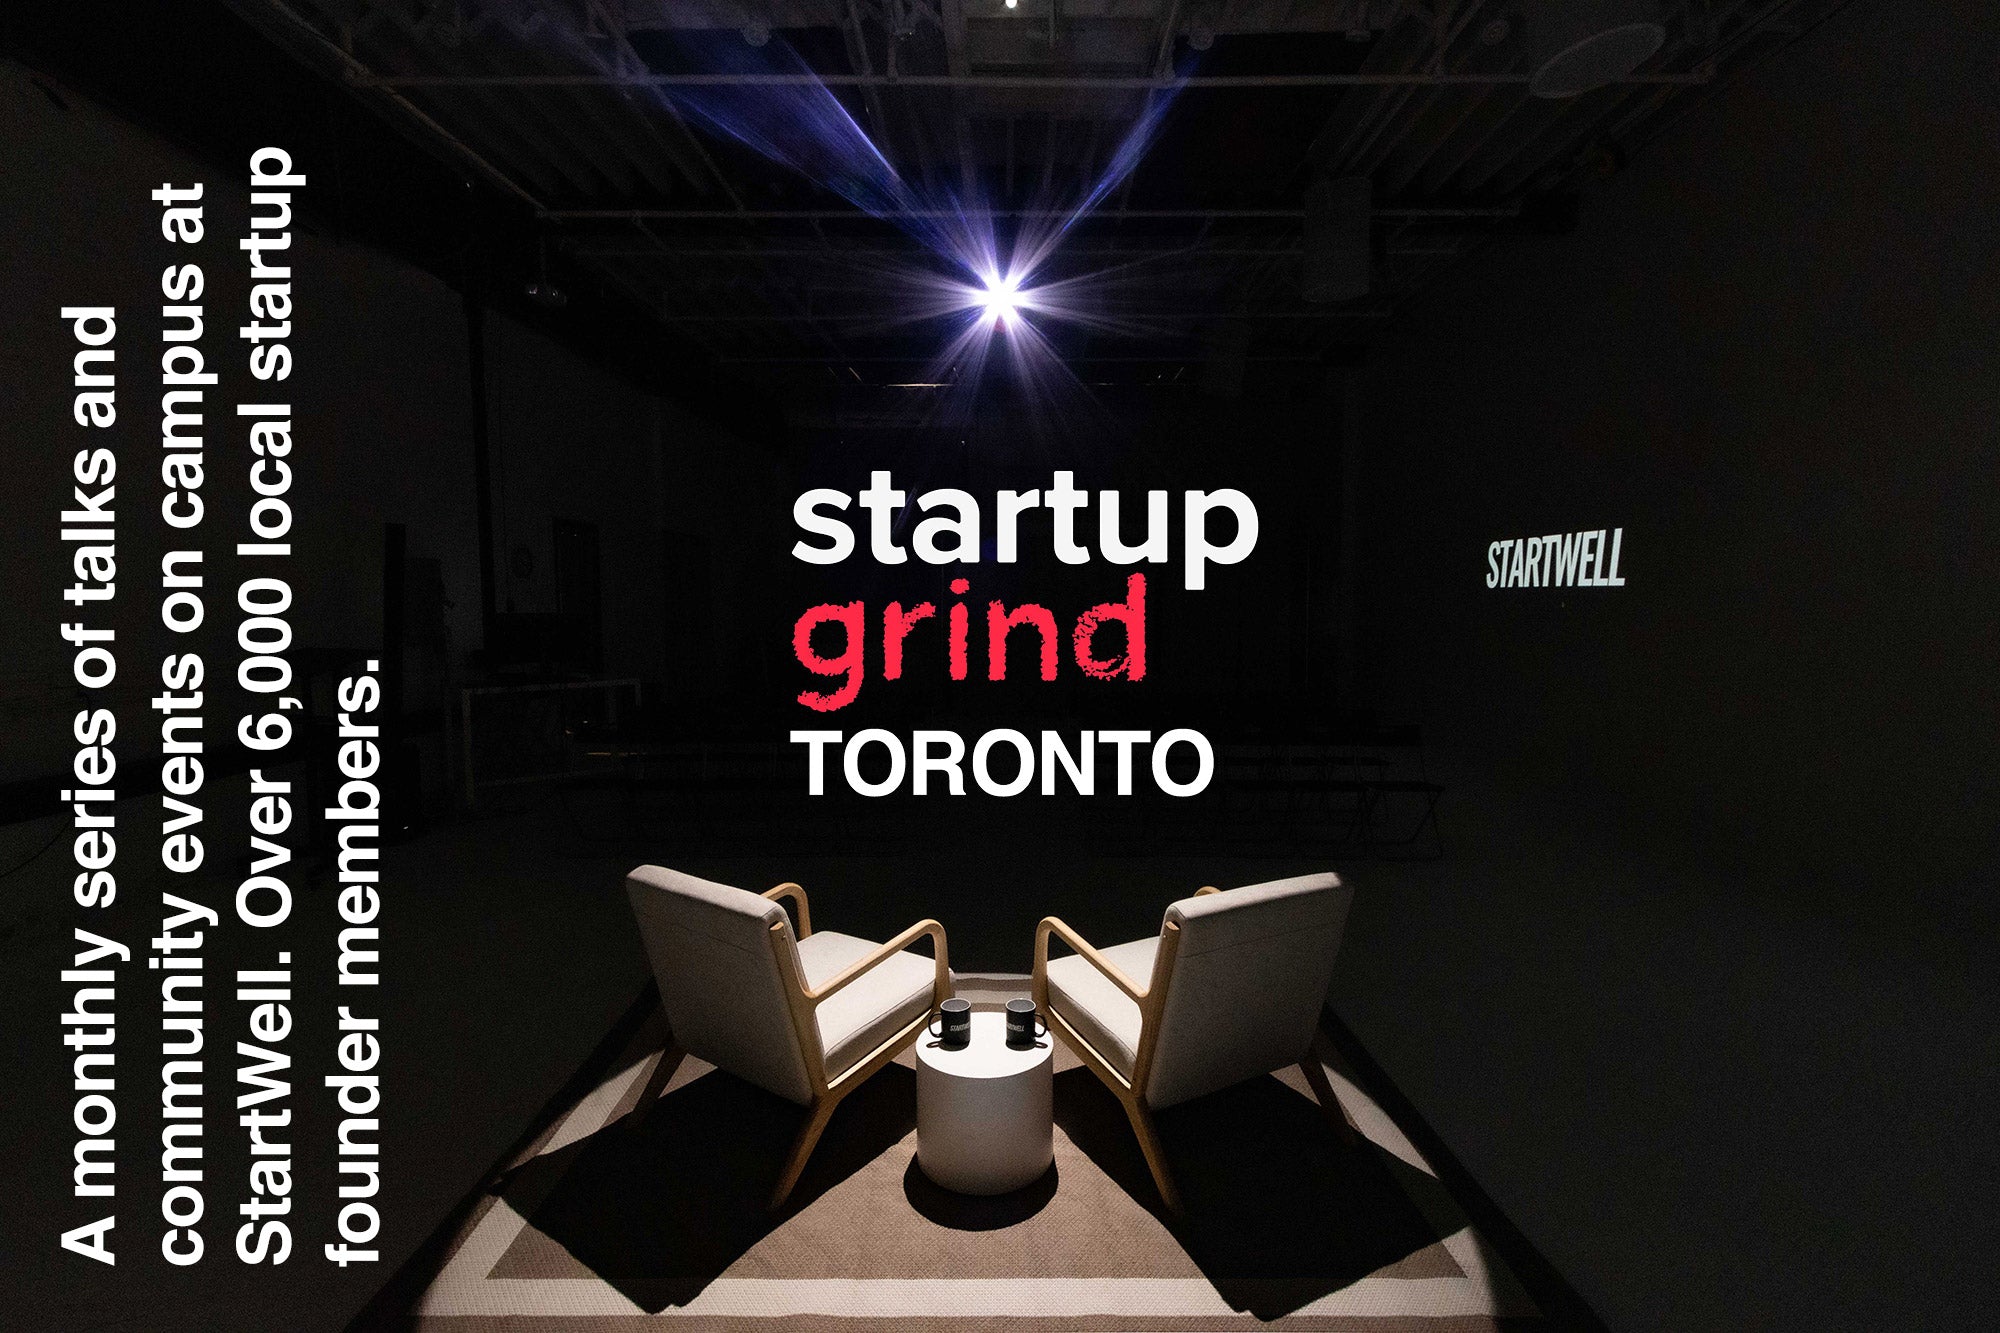 StartWell is the home of Toronto's Startup Grind Chapter - with over 6,000 entrepreneur members